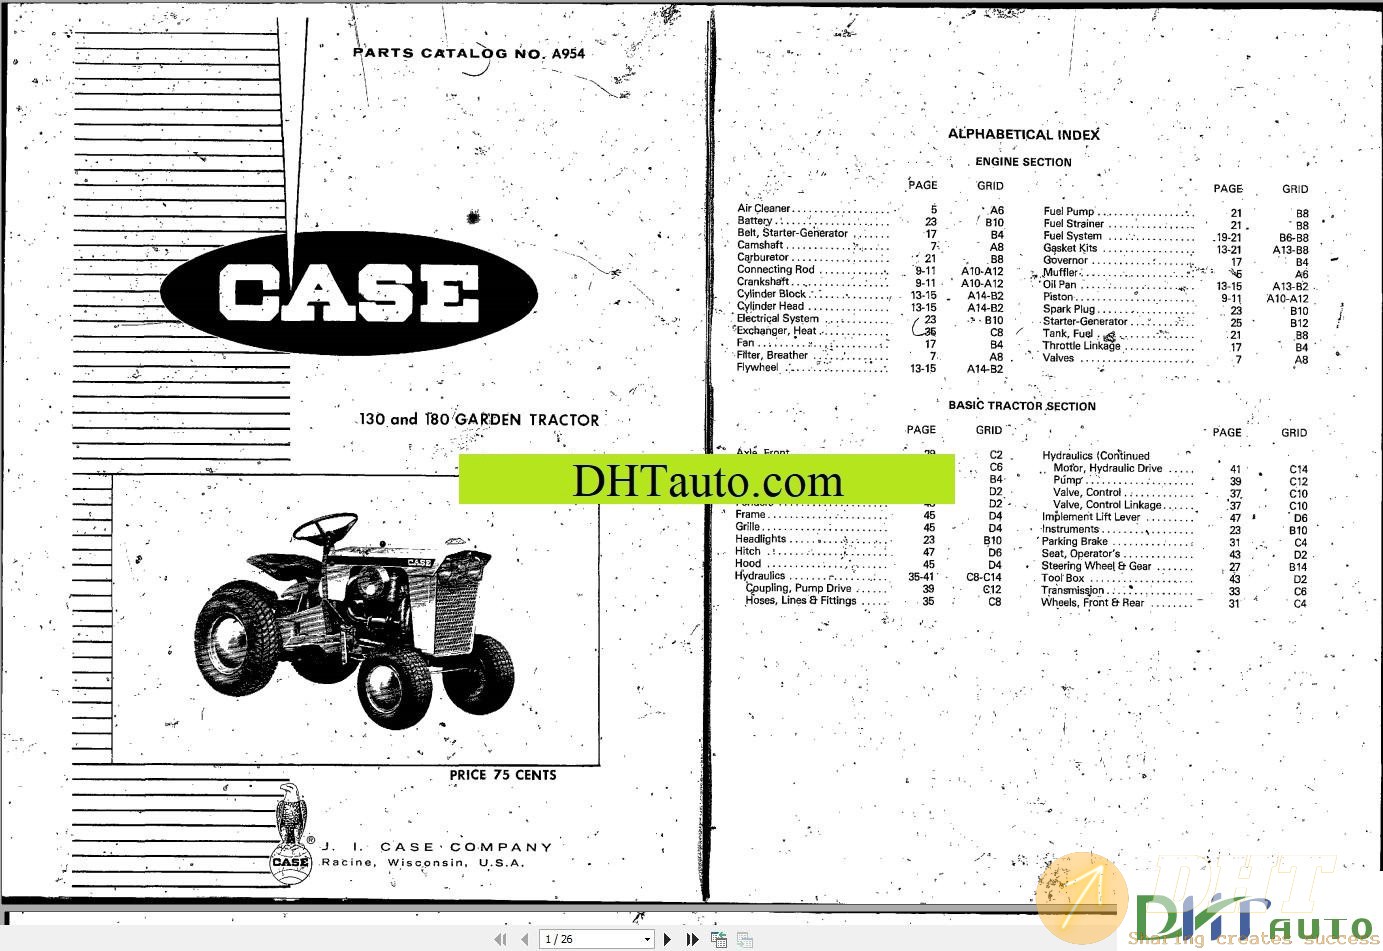 Ingersoll Compact Tractor Parts Catalog 8.jpg